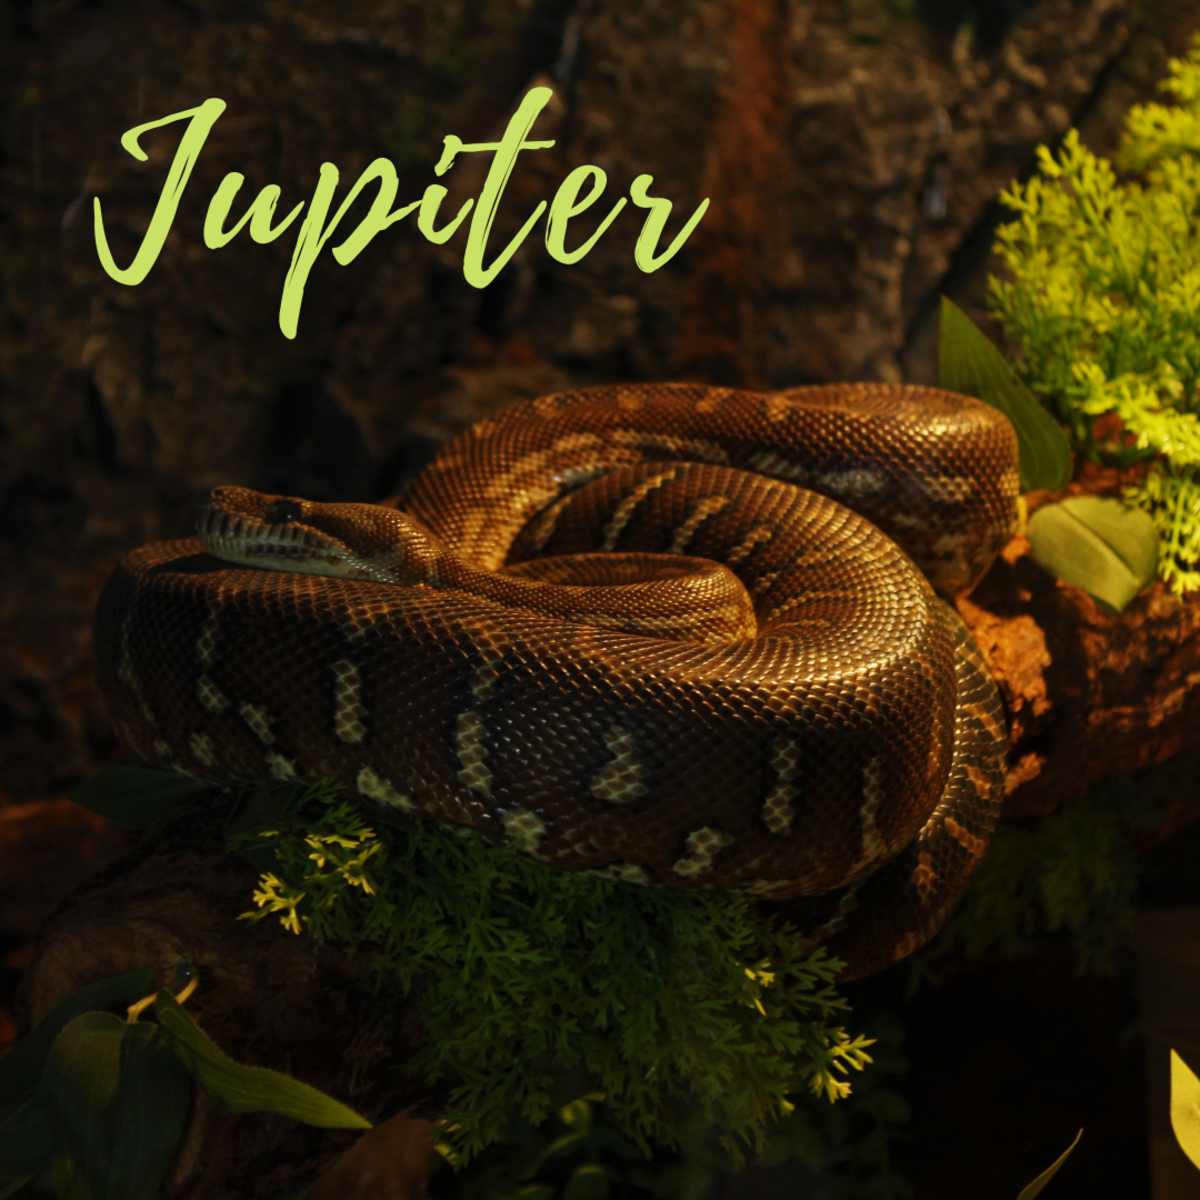 250+ Funny, Cool, Cute, and Badass Pet Snake Names - PetHelpful